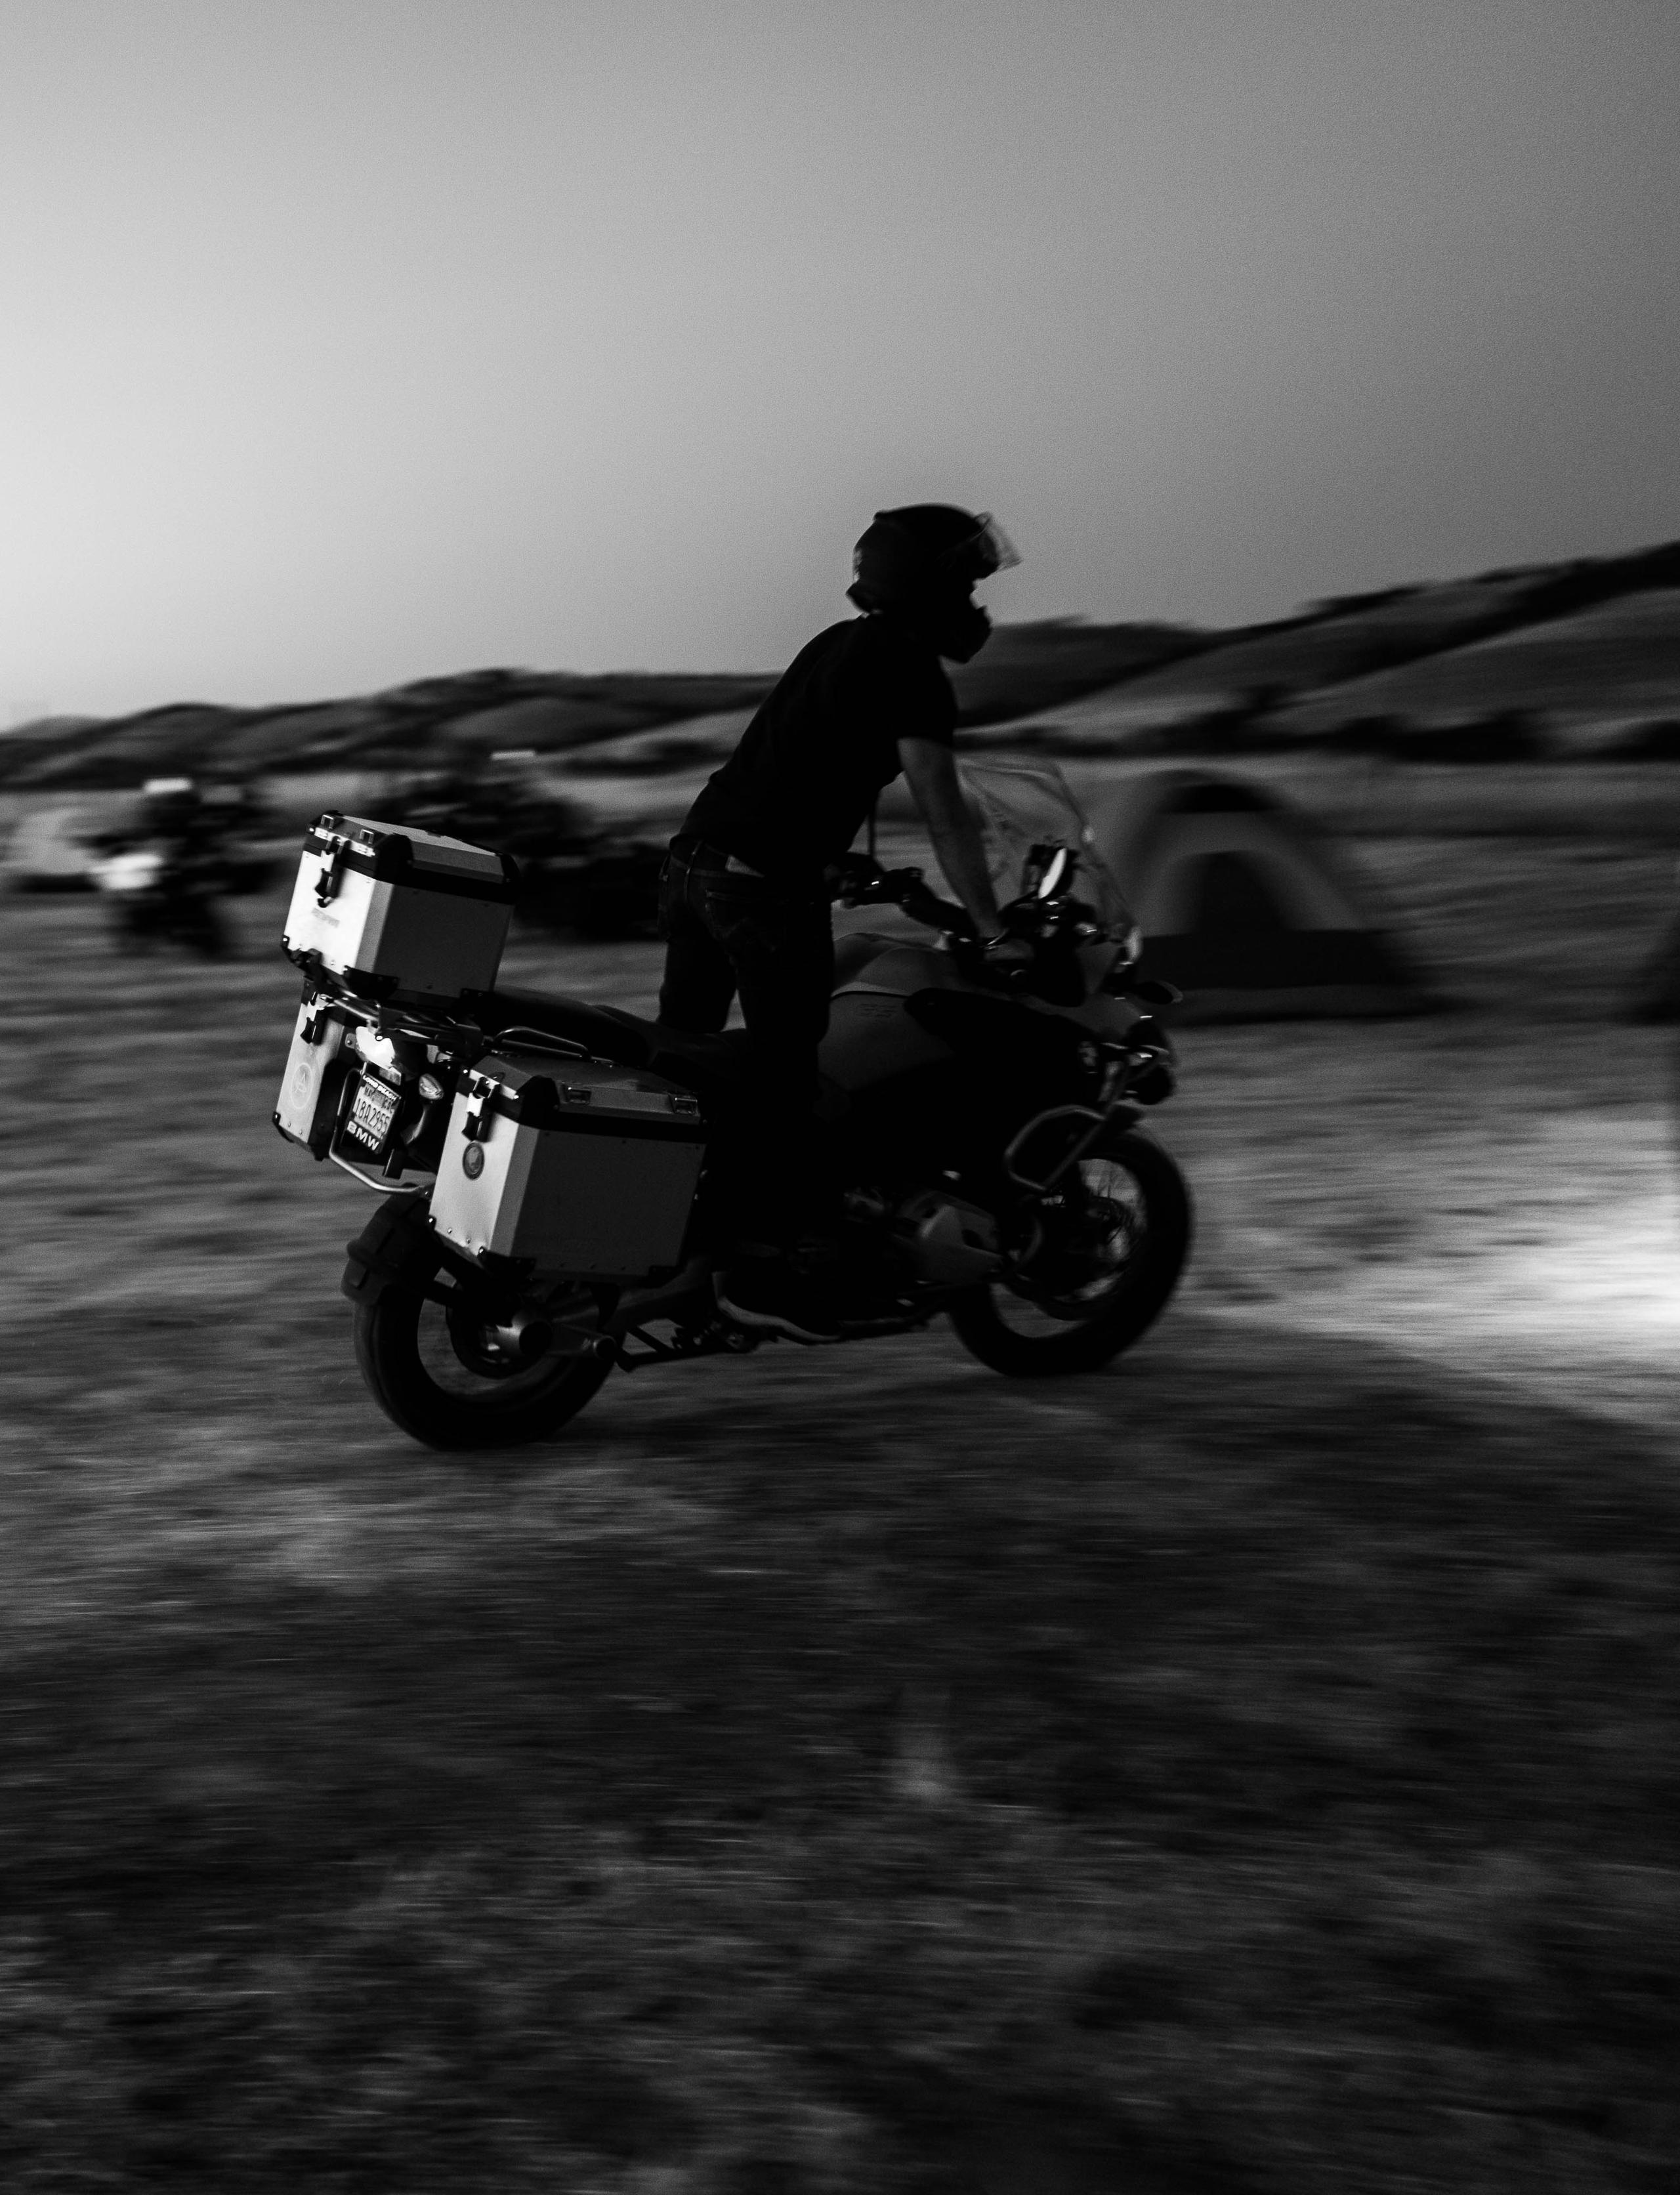 Black and white photo of motorcyclists riding through campsite at night